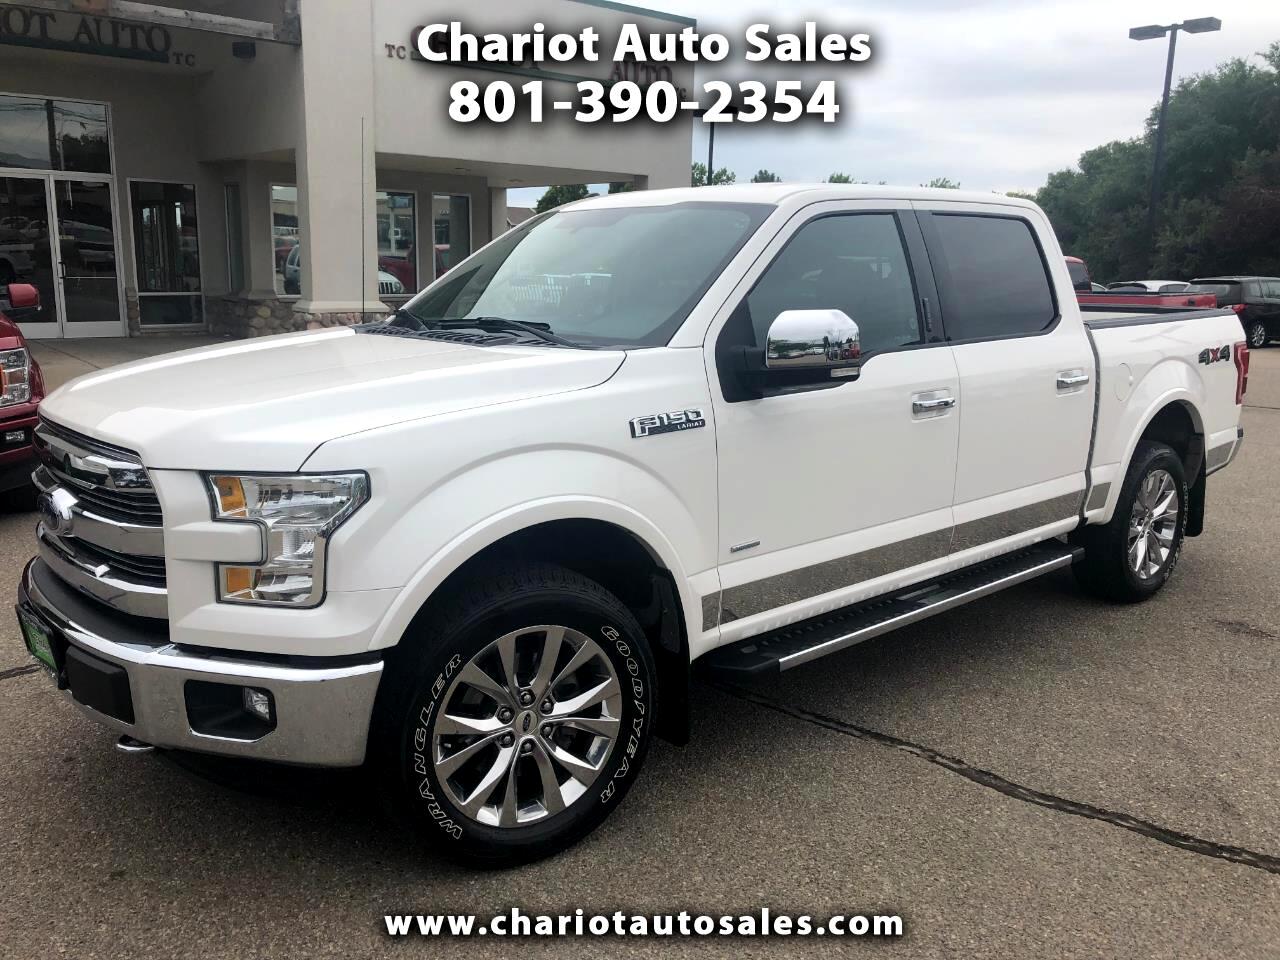 Used 2016 Ford F 150 Lariat Supercrew 5 5 Ft Bed 4wd For